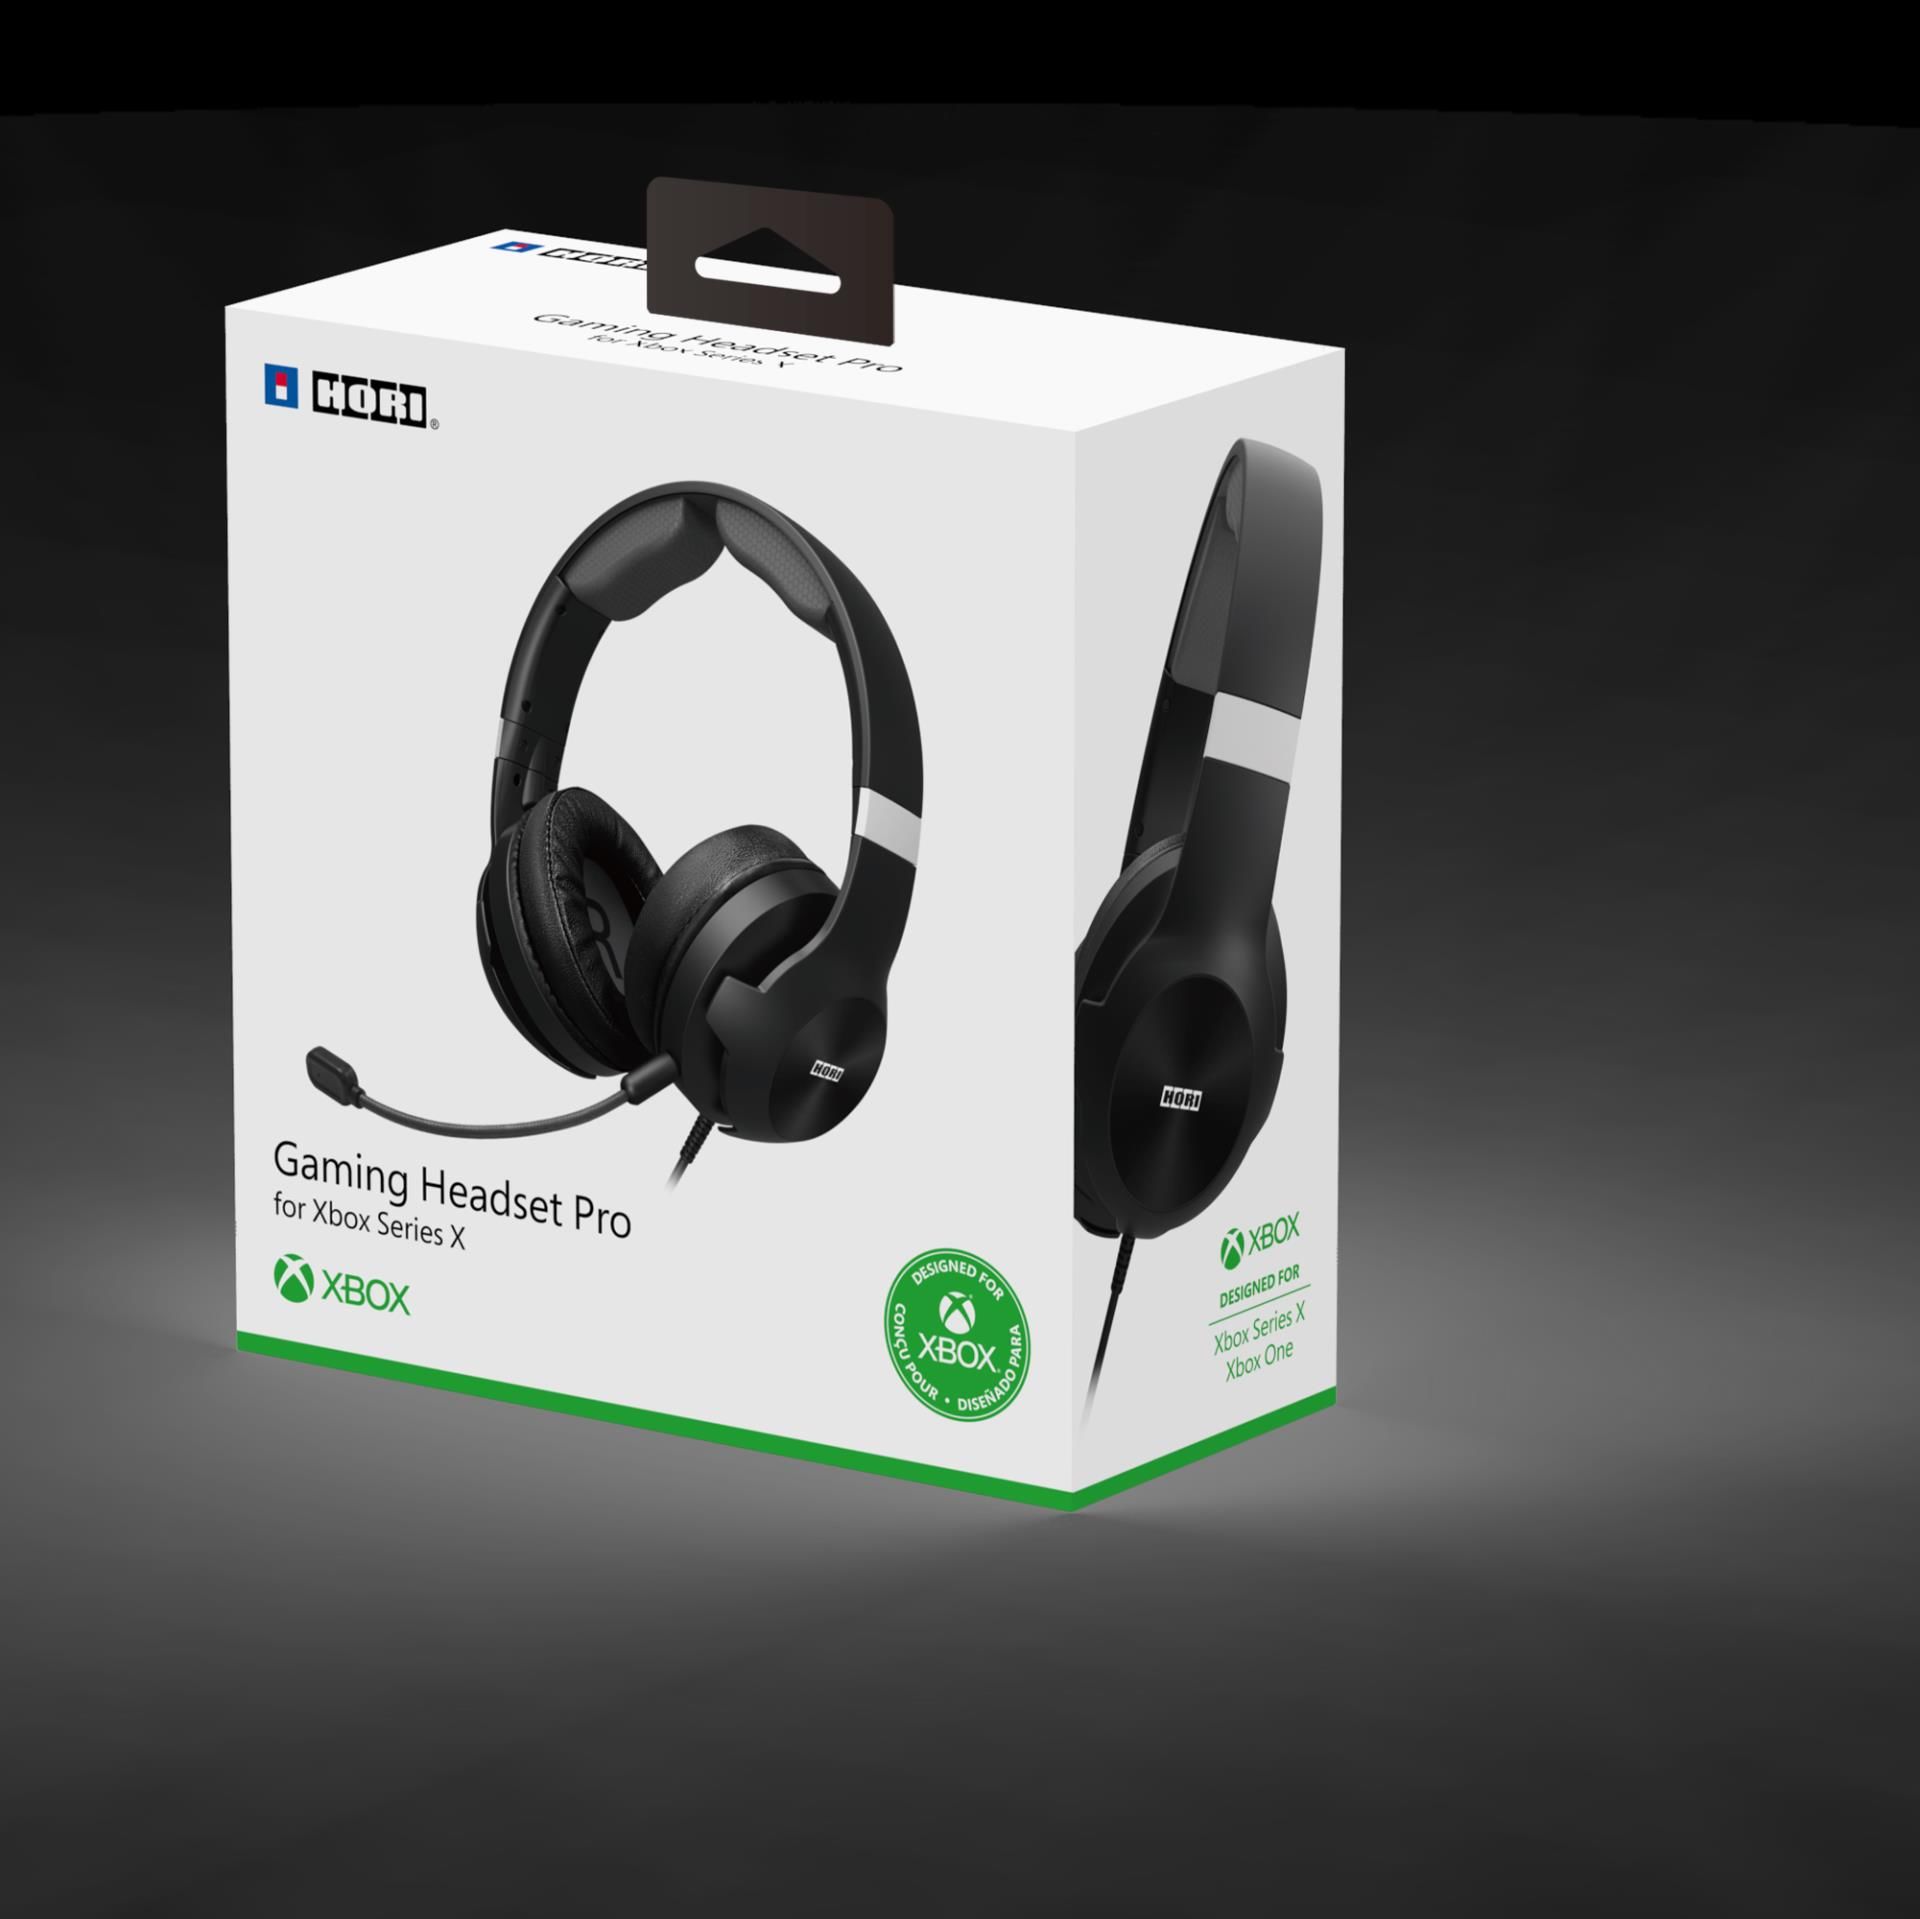 Acheter HORI - Gaming Headset Pro for Xbox Series X / S, Xbox One & PC -  Micros - Casques prix promo neuf et occasion pas cher